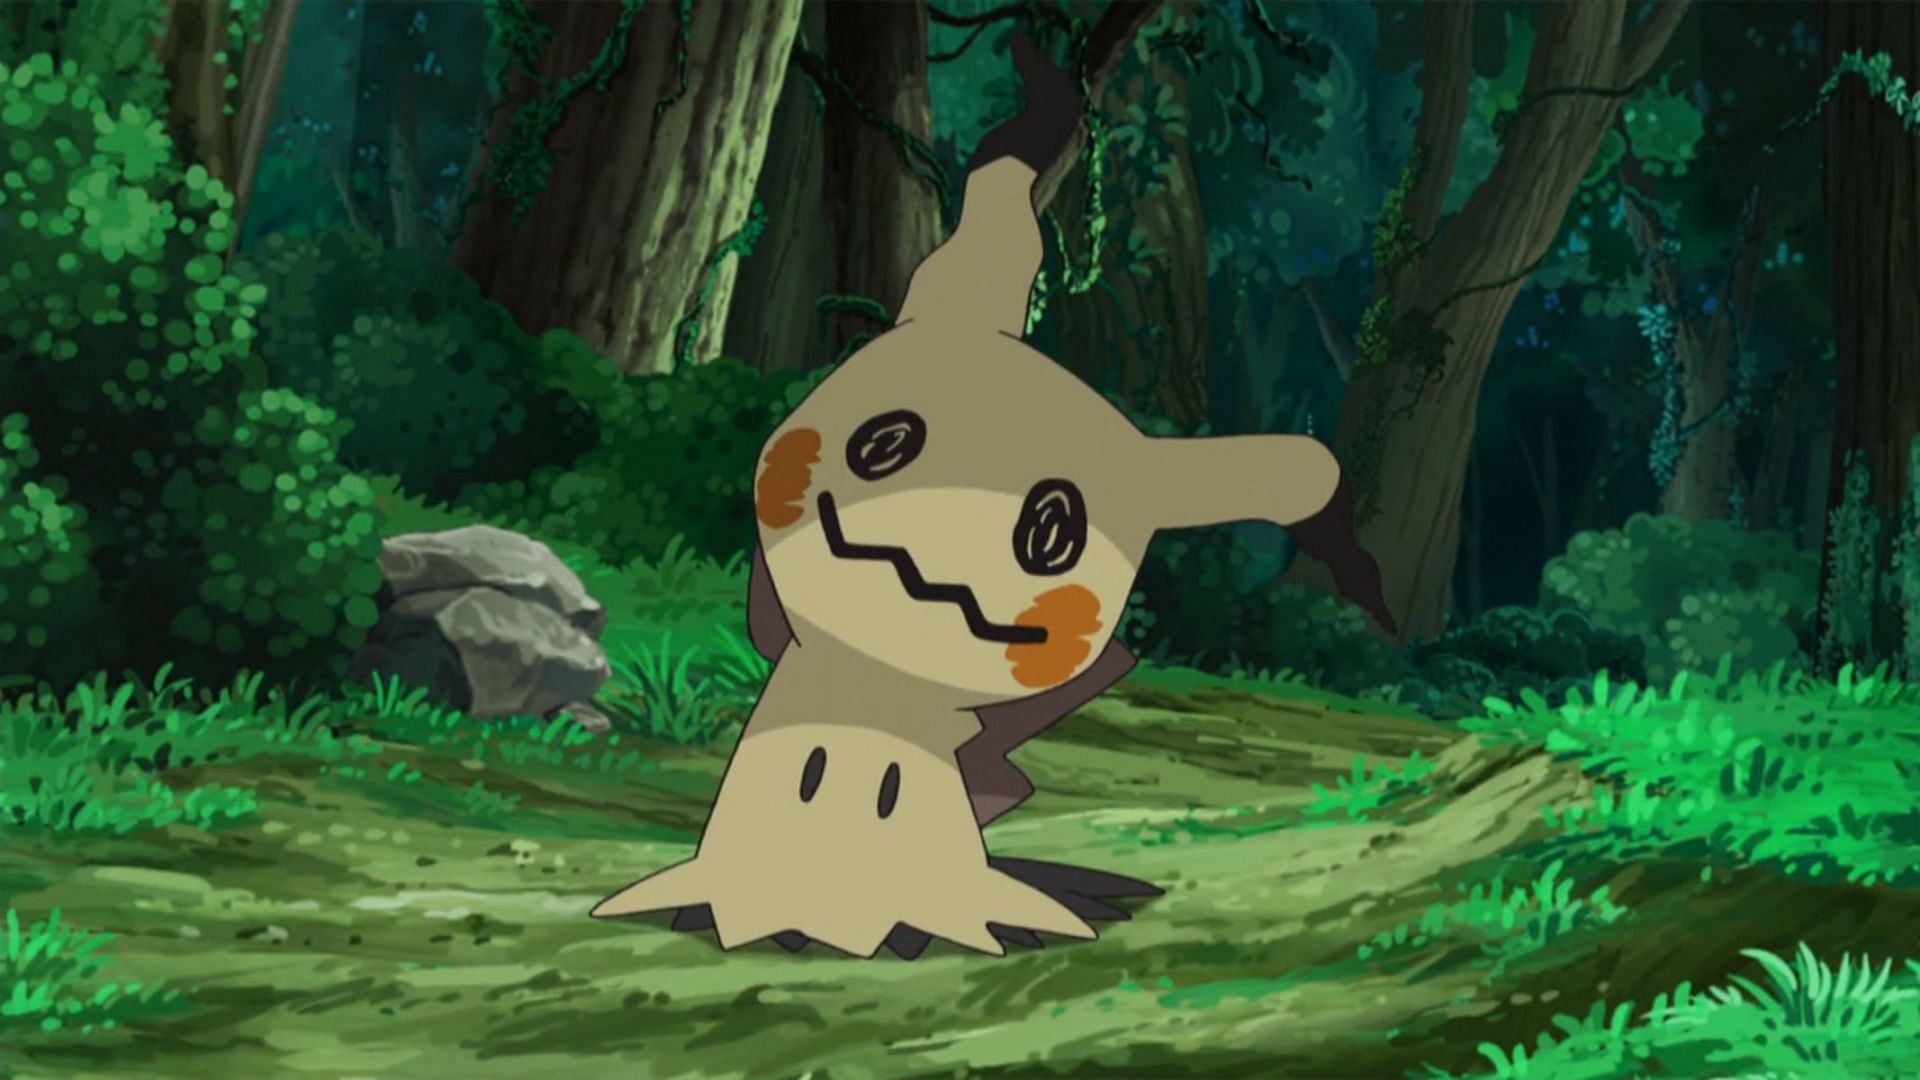 mimikyu :: Pokedex :: Pokemon Characters :: Pokemon :: fandoms / all /  funny posts, pictures and gifs on JoyReactor